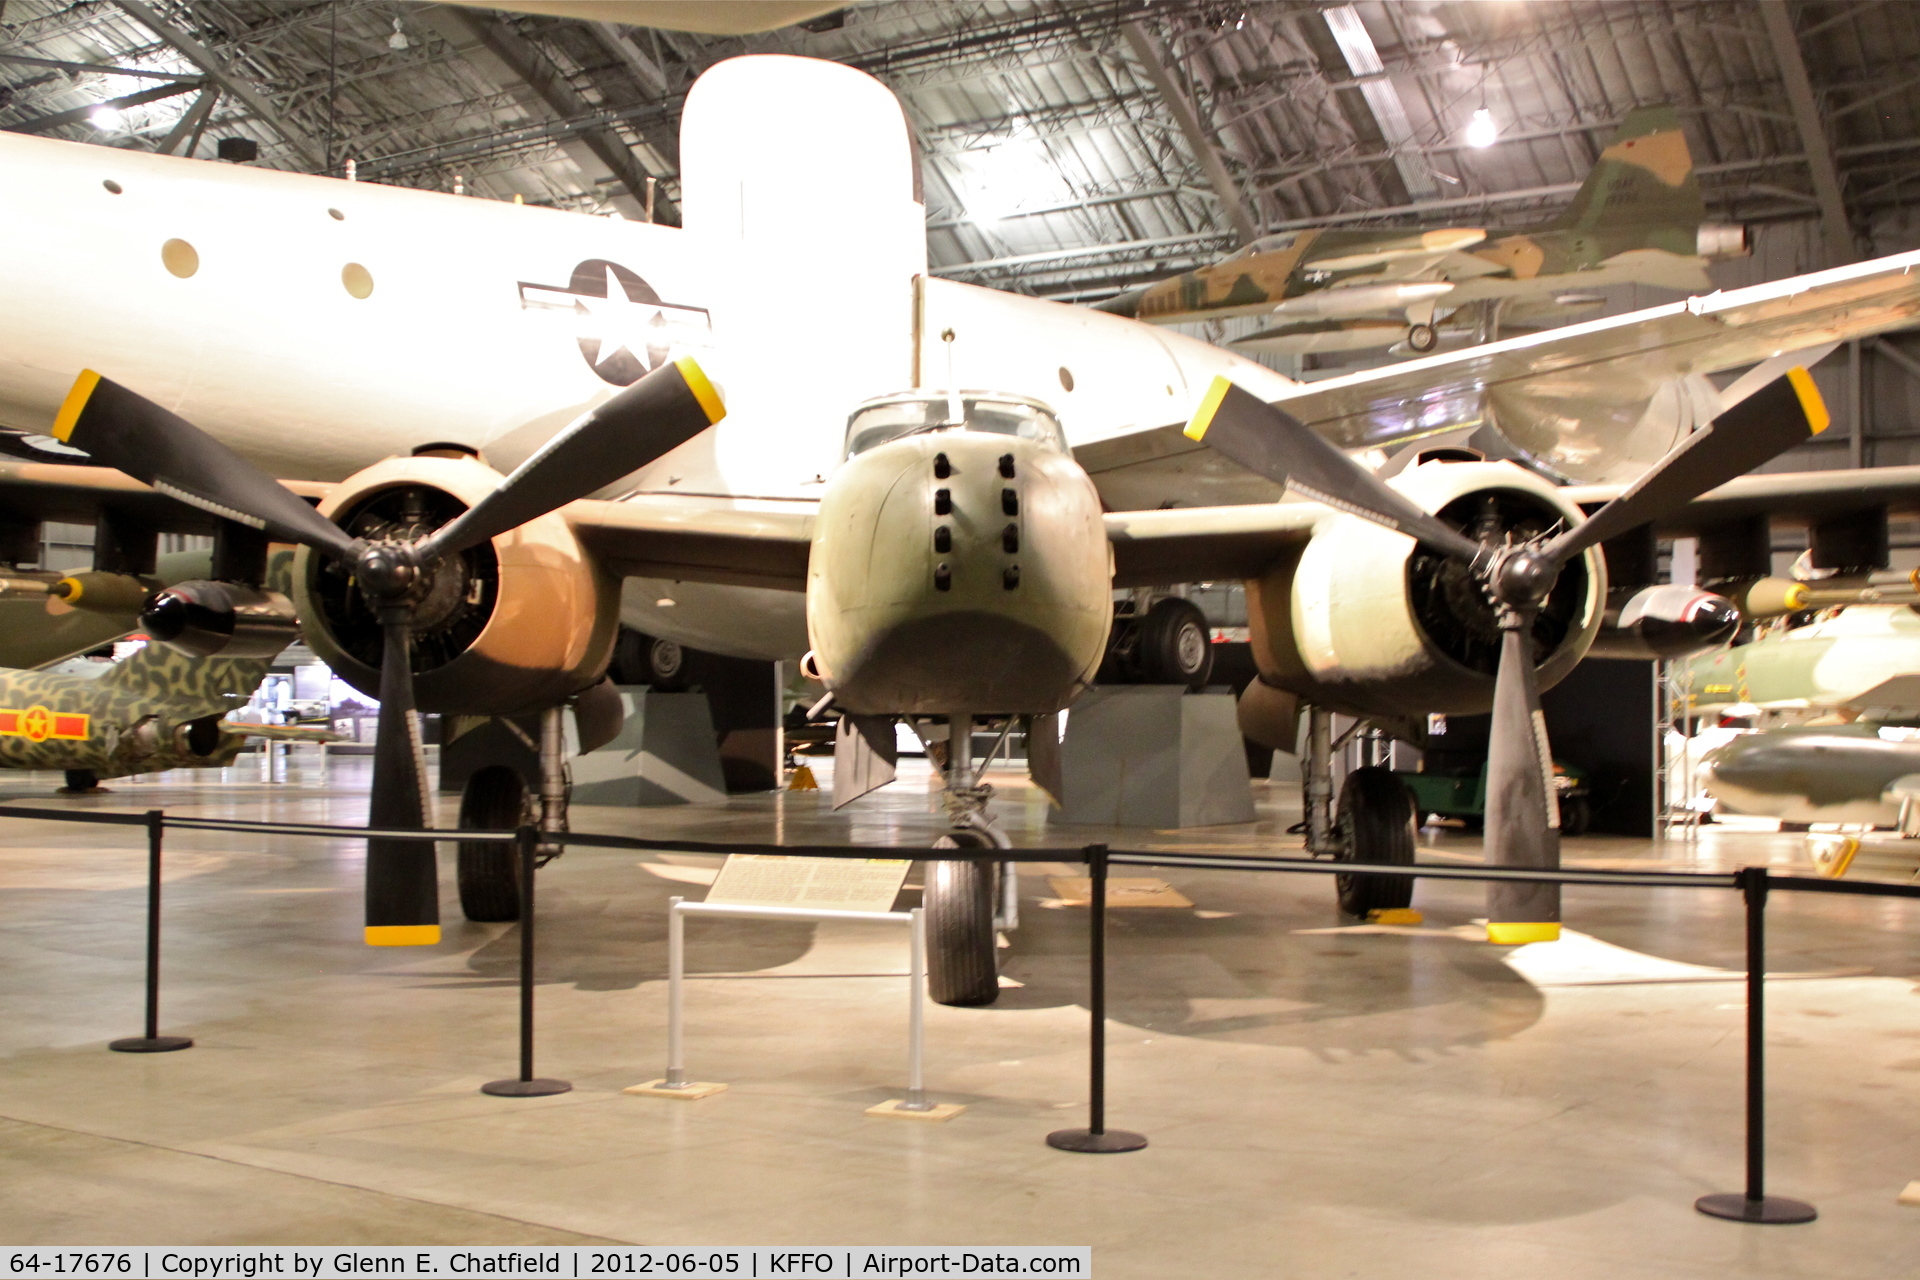 64-17676, 1971 Douglas-On Mark B-26K Counter Invader C/N 7309 (was 41-39596), At the Air Force Museum